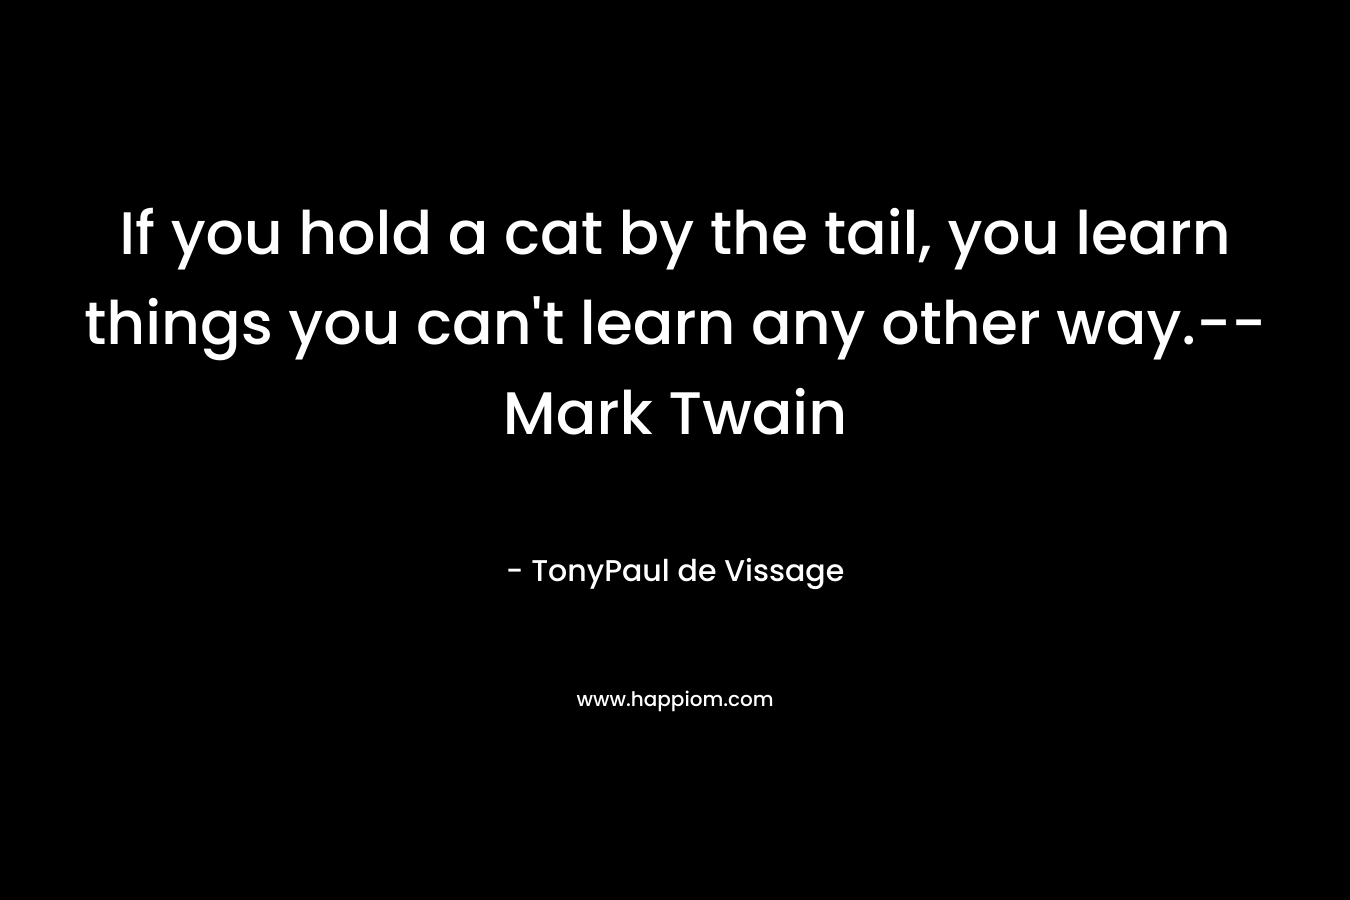 If you hold a cat by the tail, you learn things you can't learn any other way.--Mark Twain